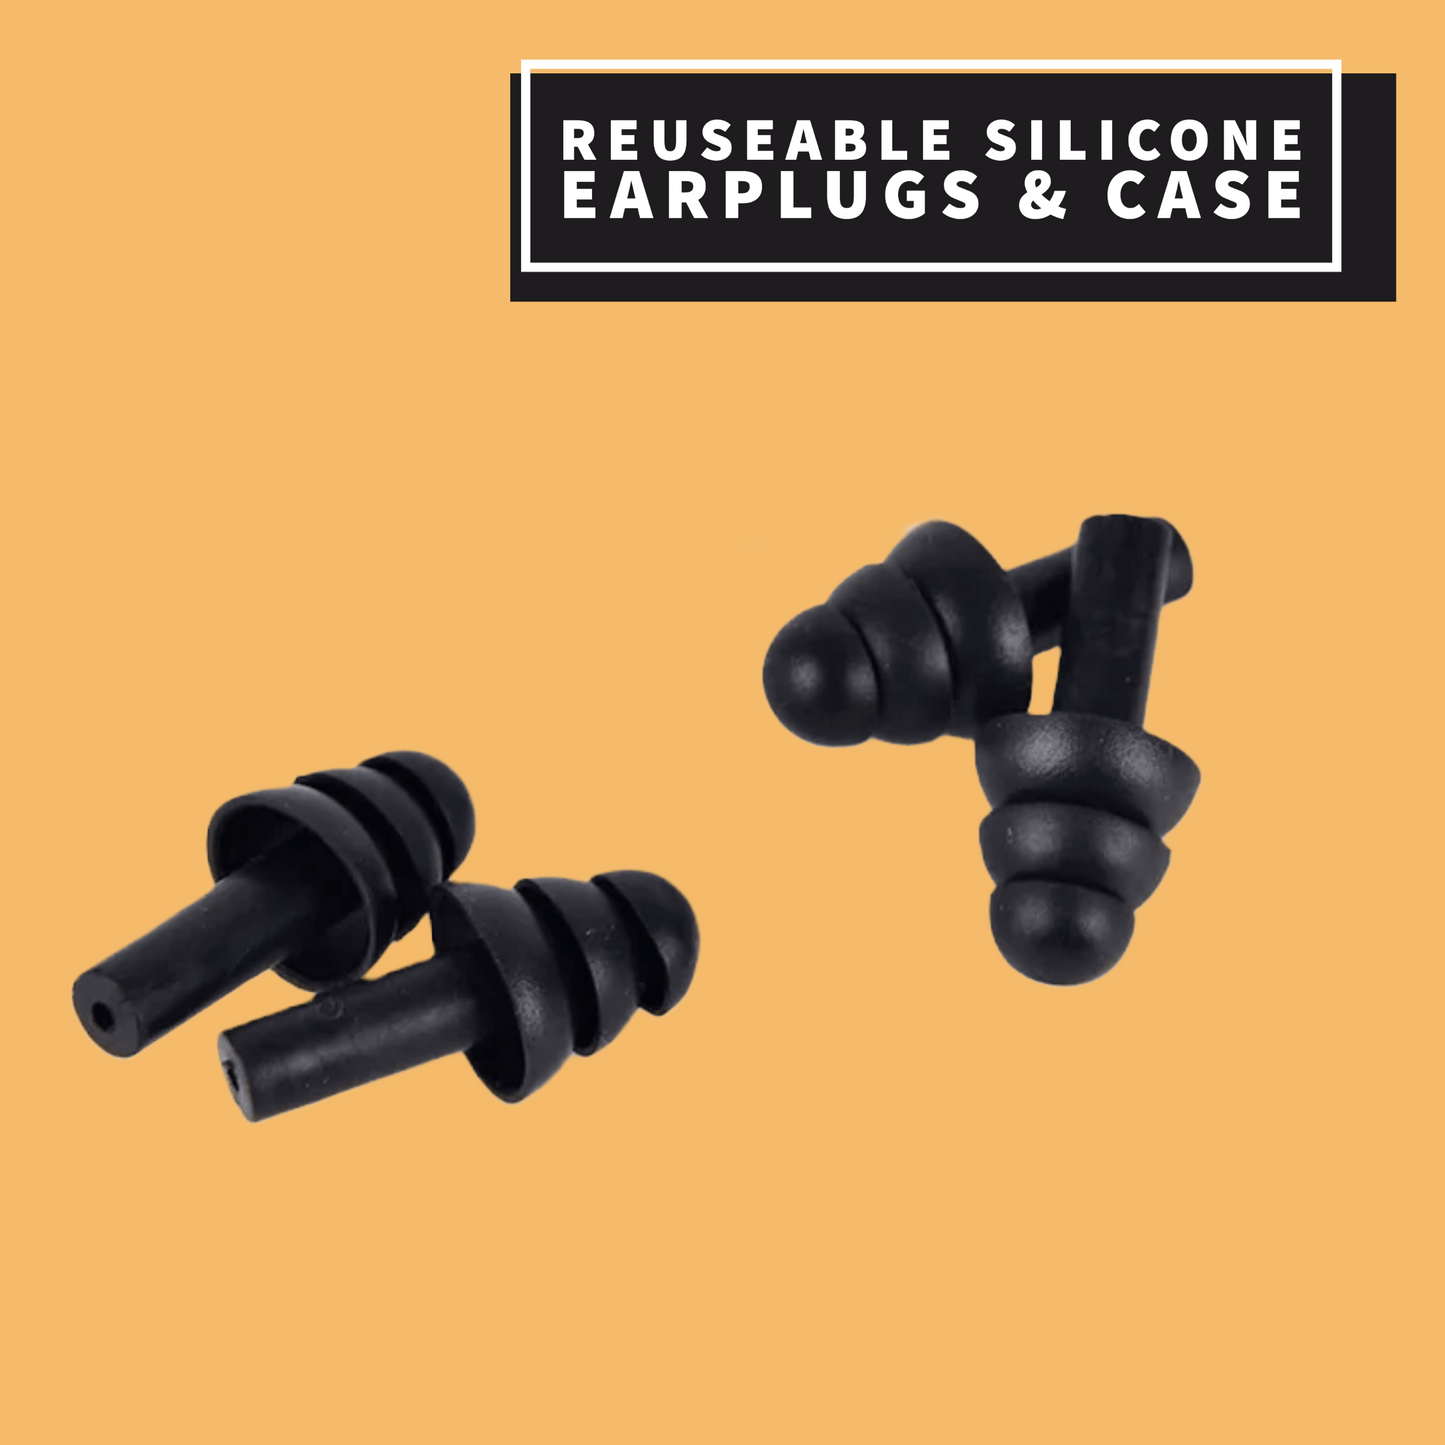 Reusable Black Silicone Earplugs With Protective Hard Case (3 Sets)